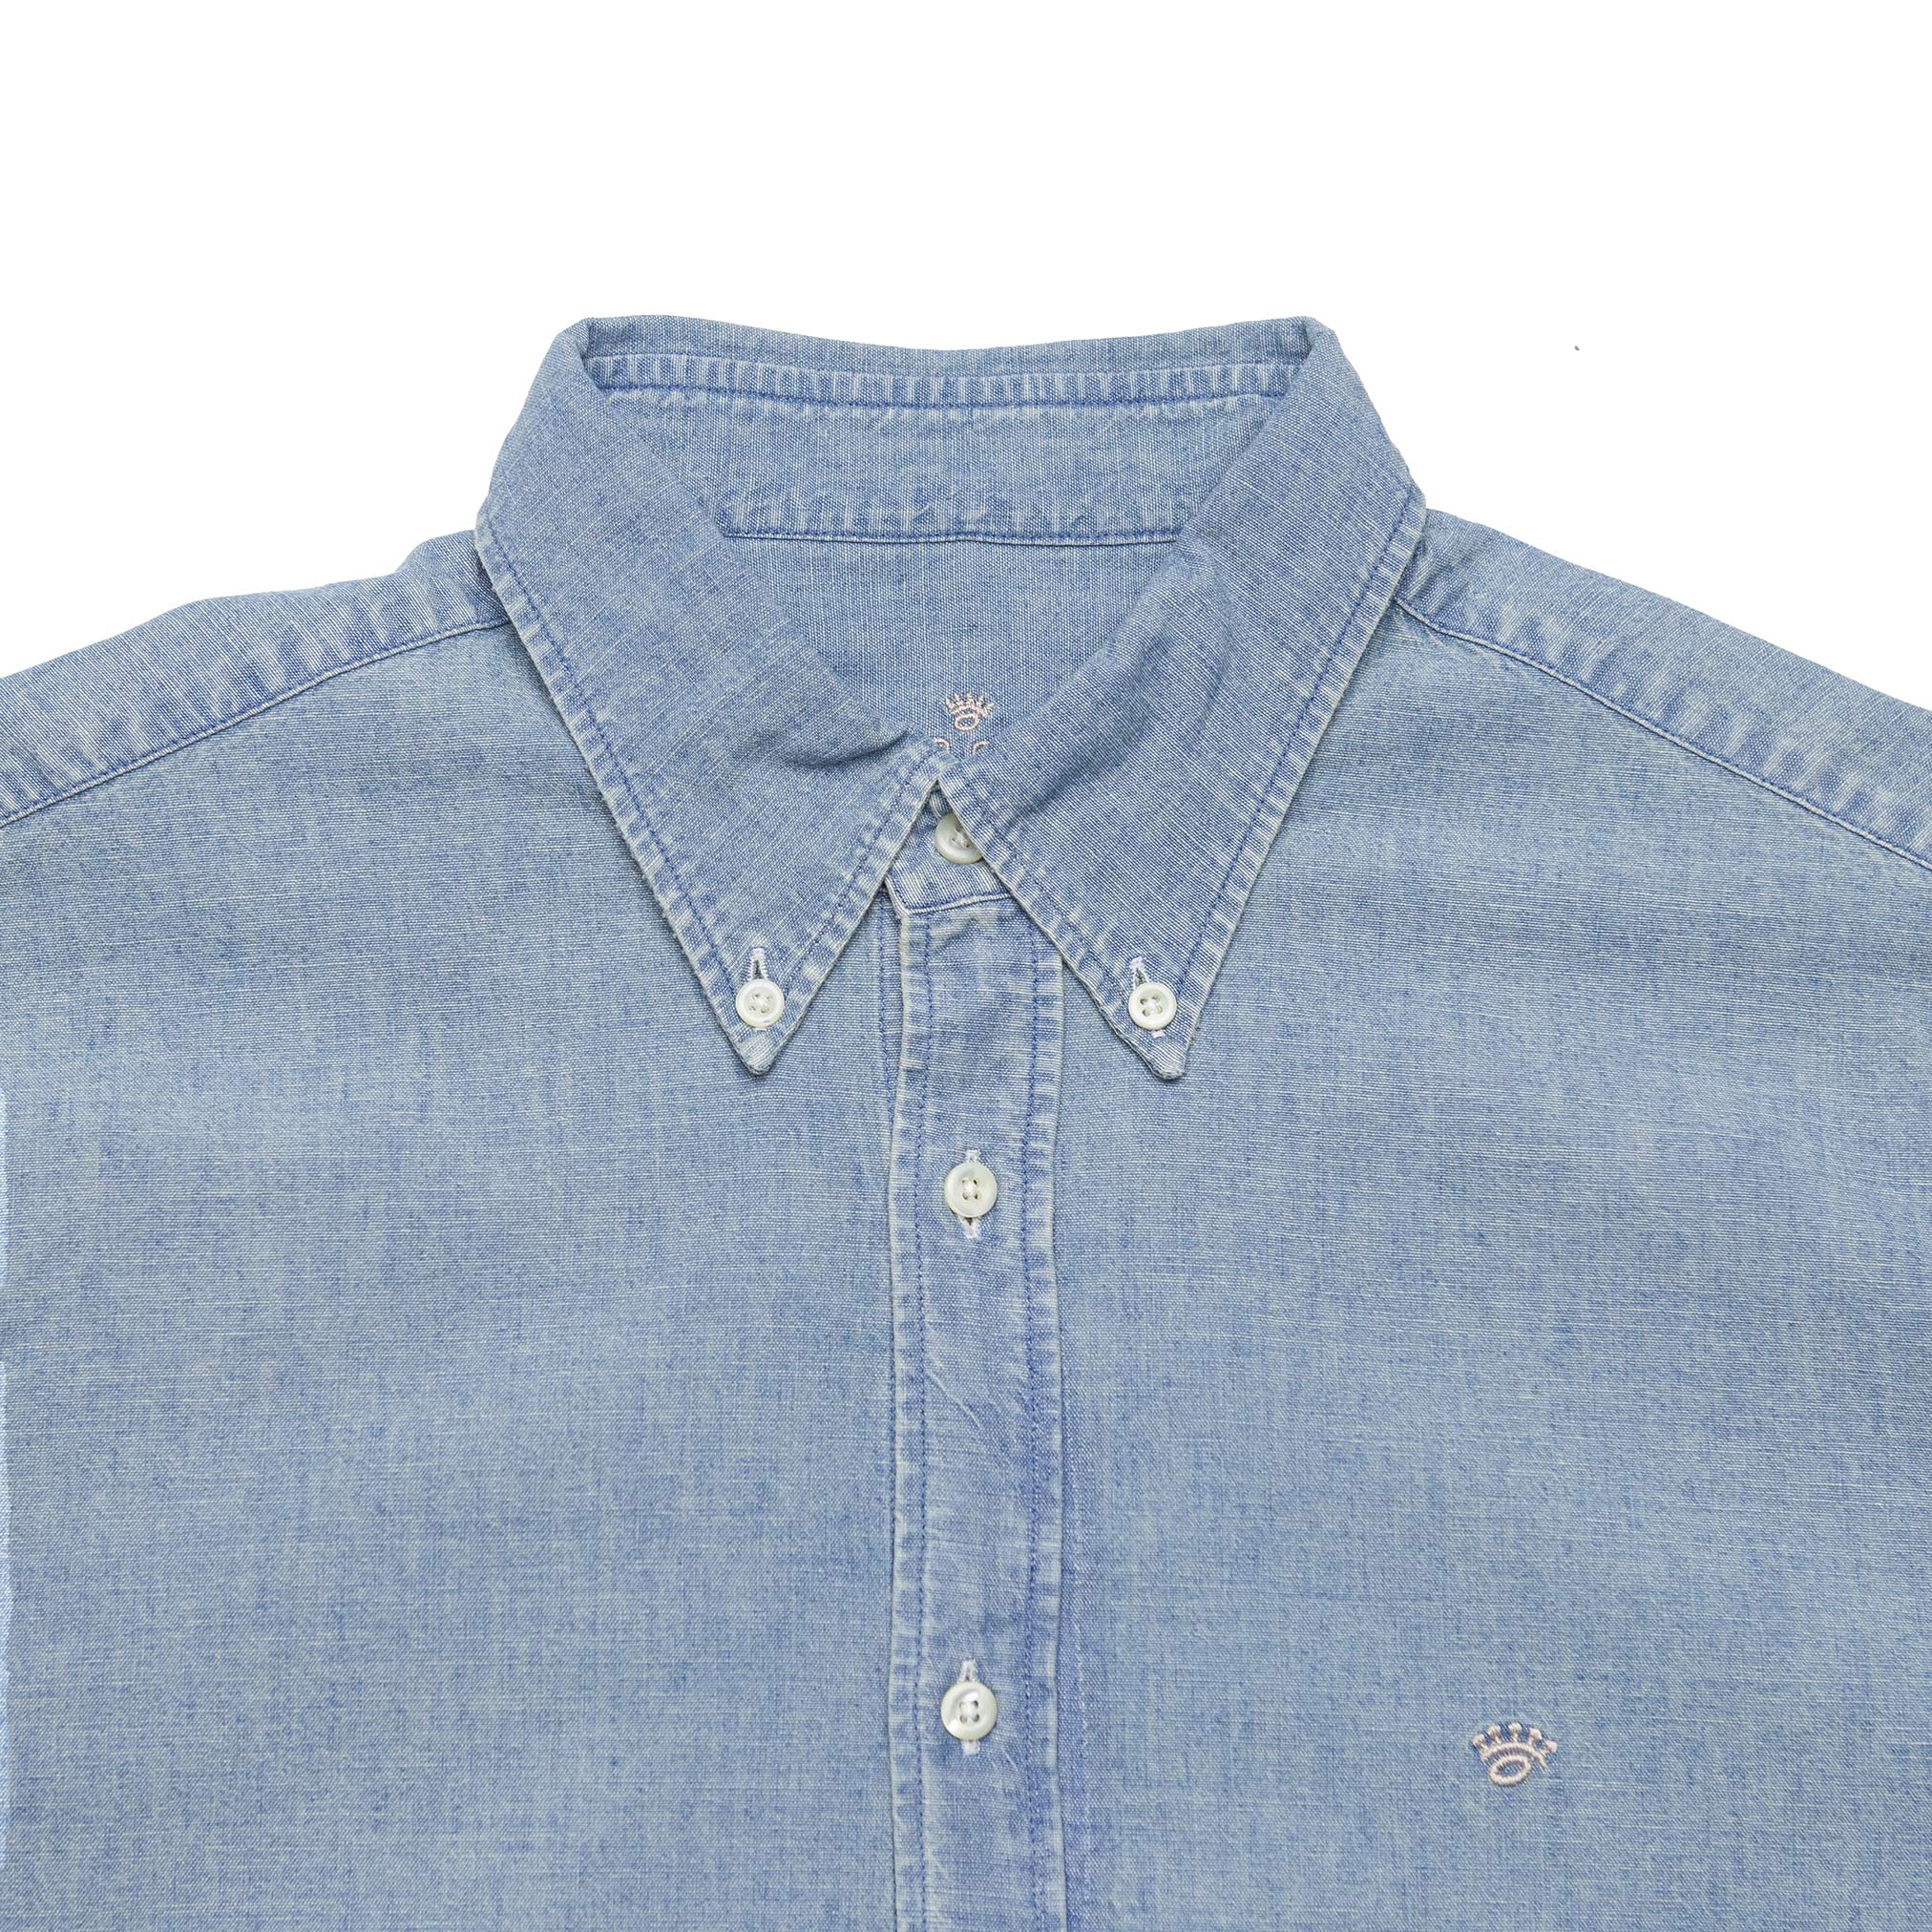 Oxford Shirt in Vintage Wash Chambray